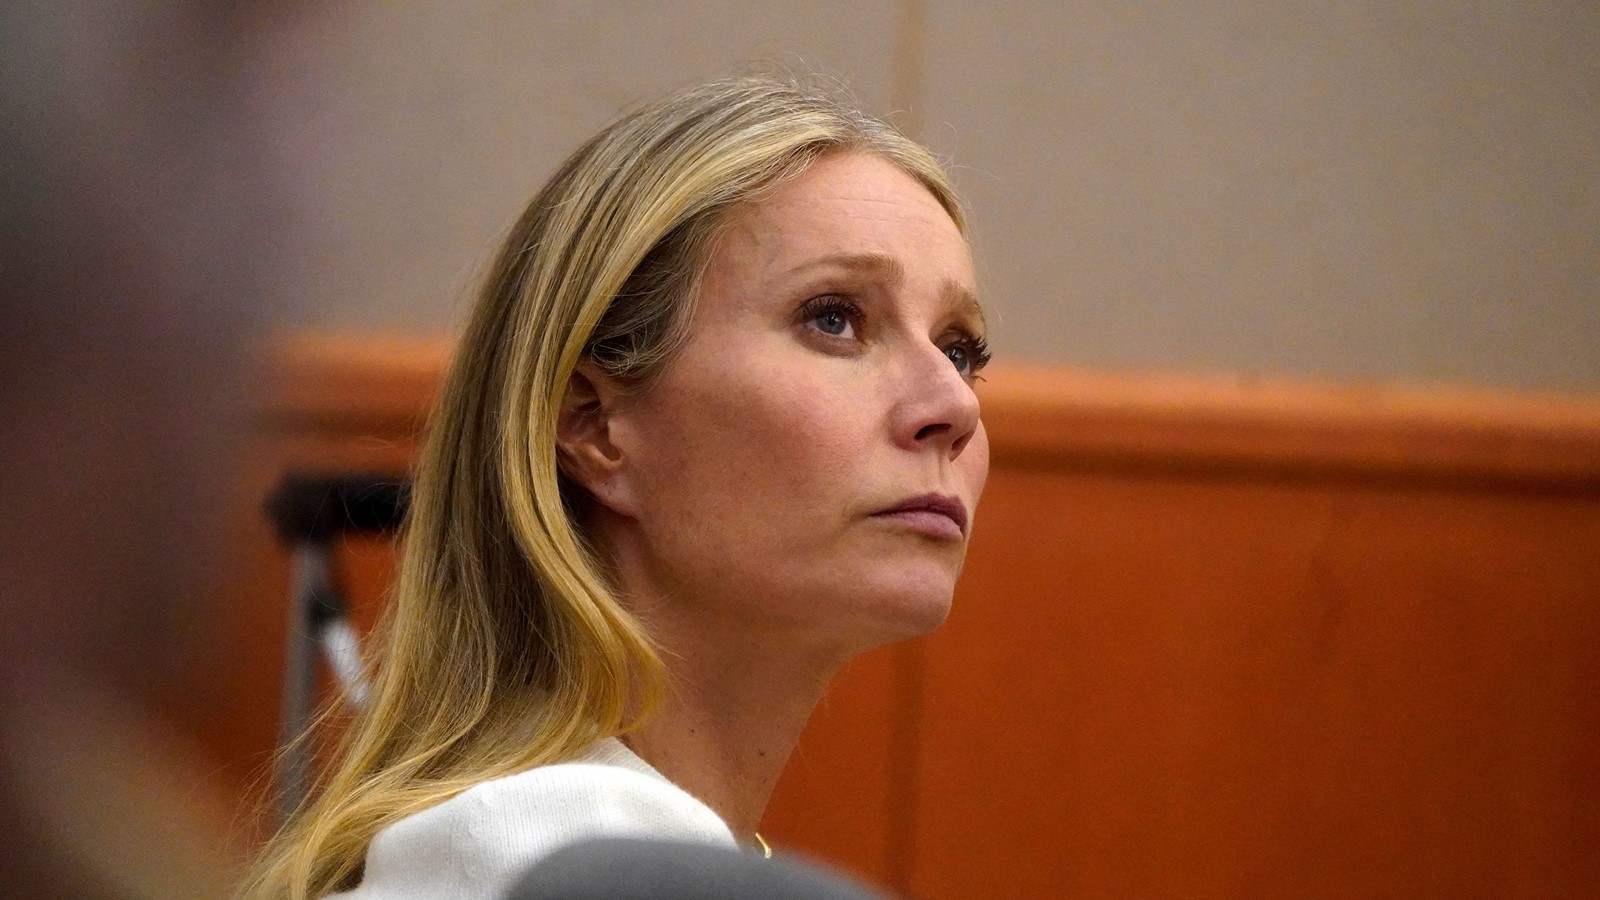 Gwyneth Paltrow not guilty of causing ski accident, jury rules in her favor